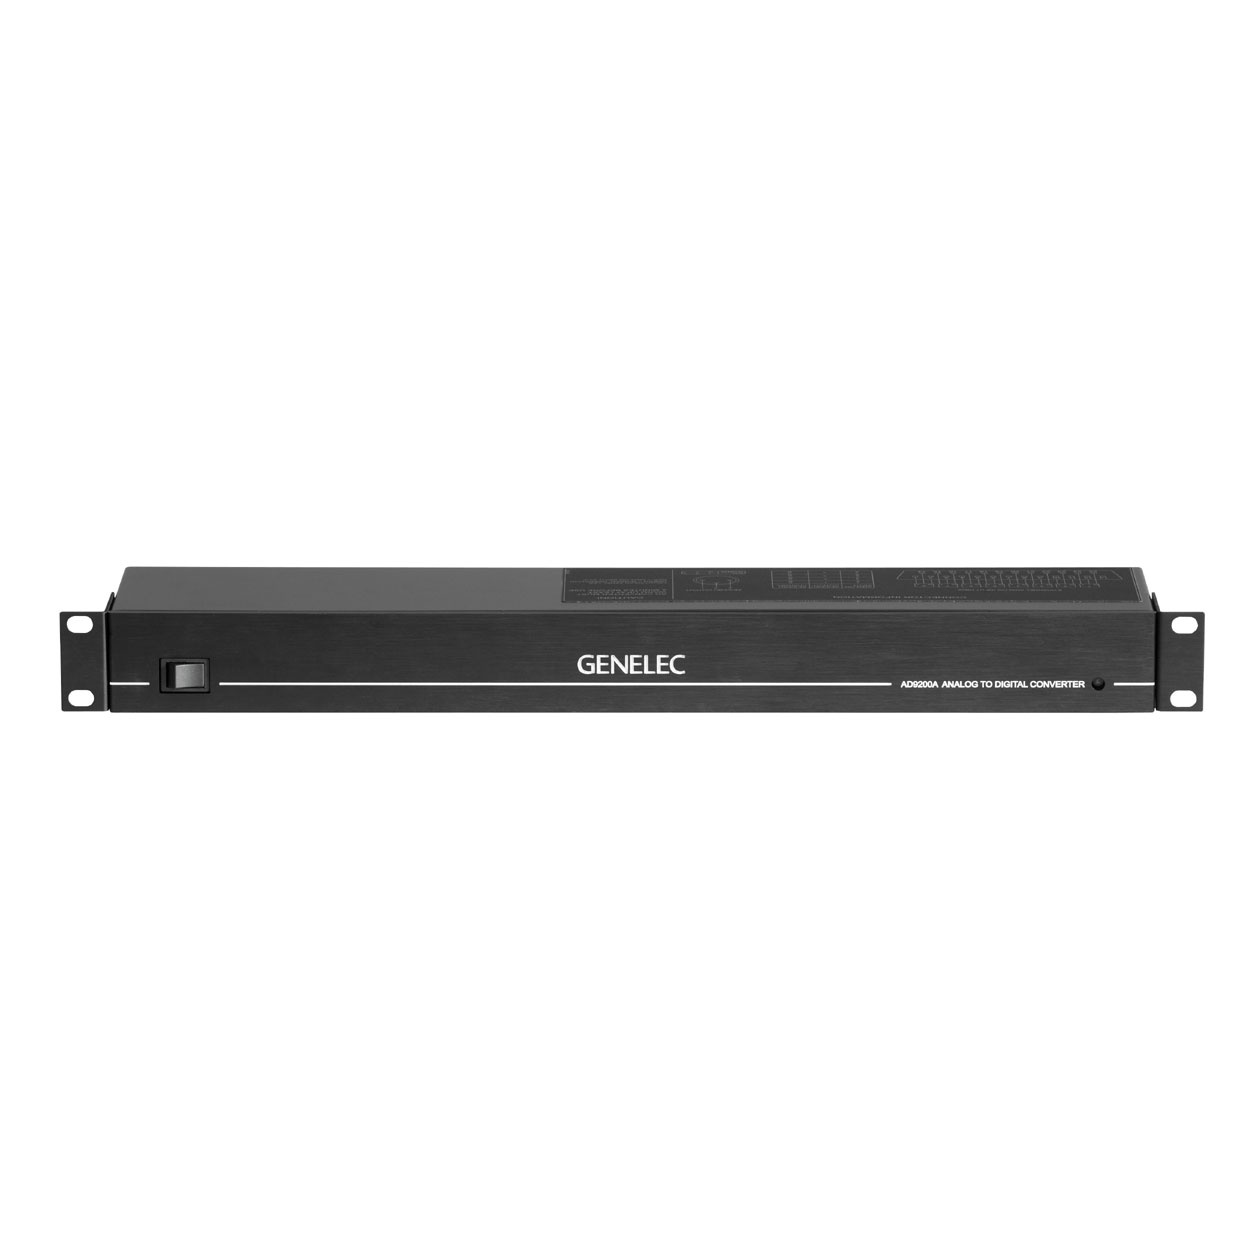 Genelec AD9200A 8-Channel Analog to Digital Converter